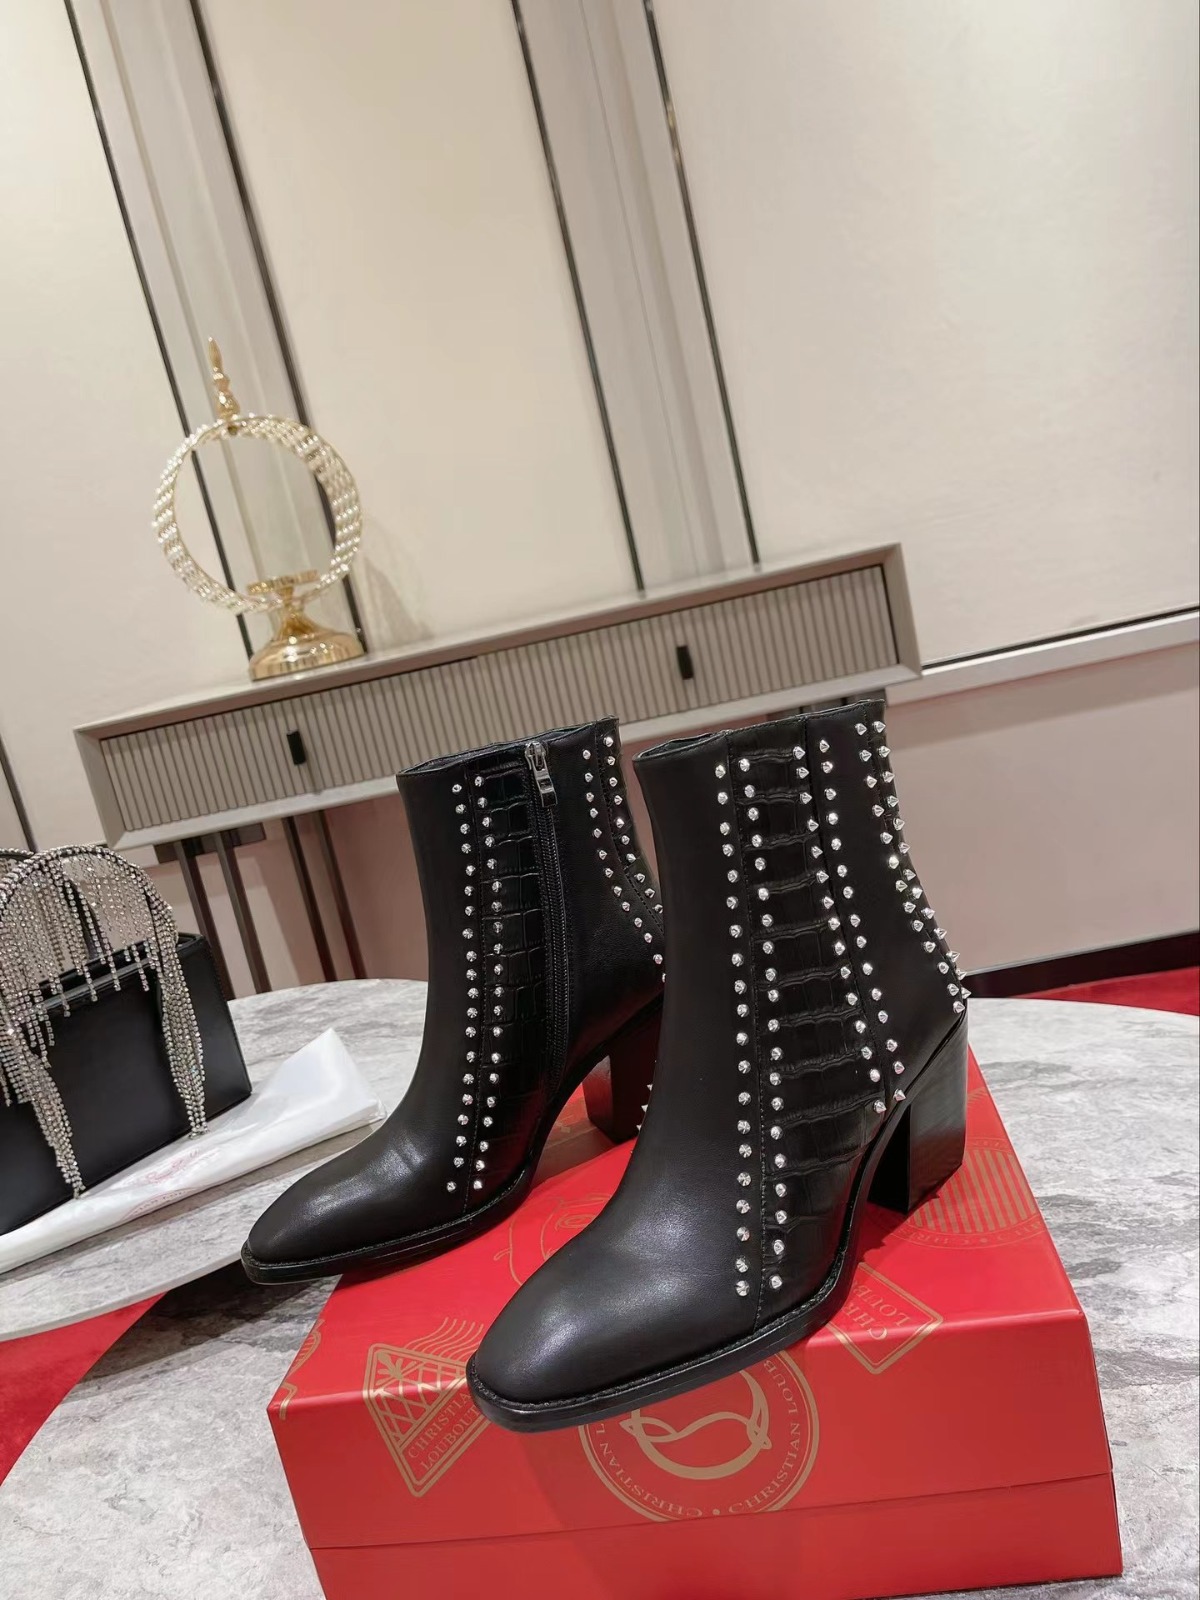 Christian Louboutin Spiked Leather Boot - GlamGems Boutique